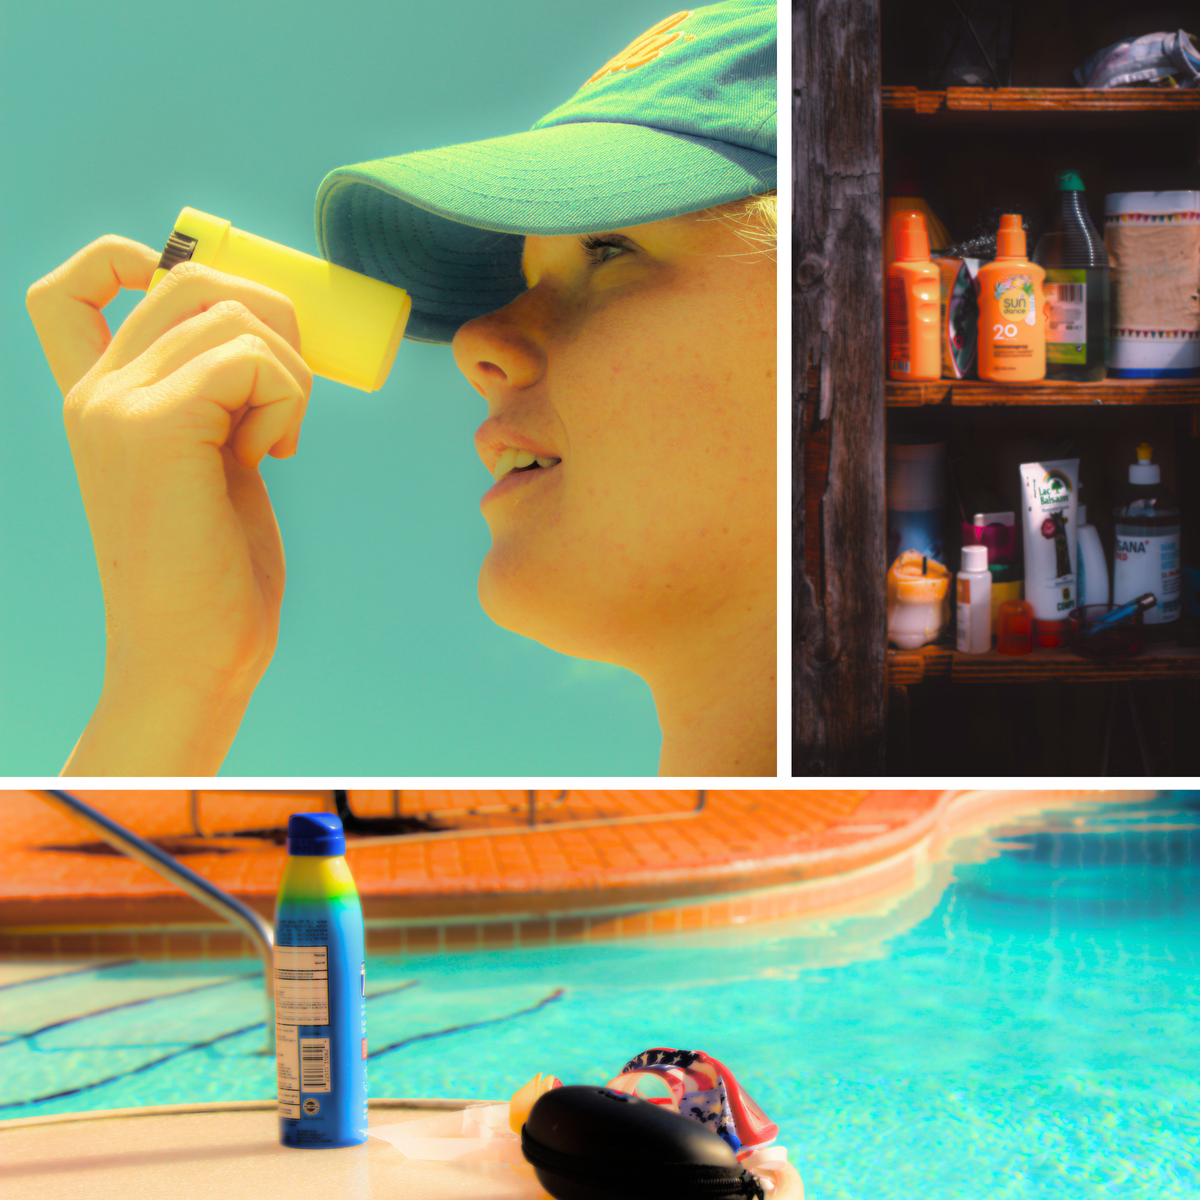 Person applying sun stick, cabinet of sunblock, pool with sunscreen spray bottle